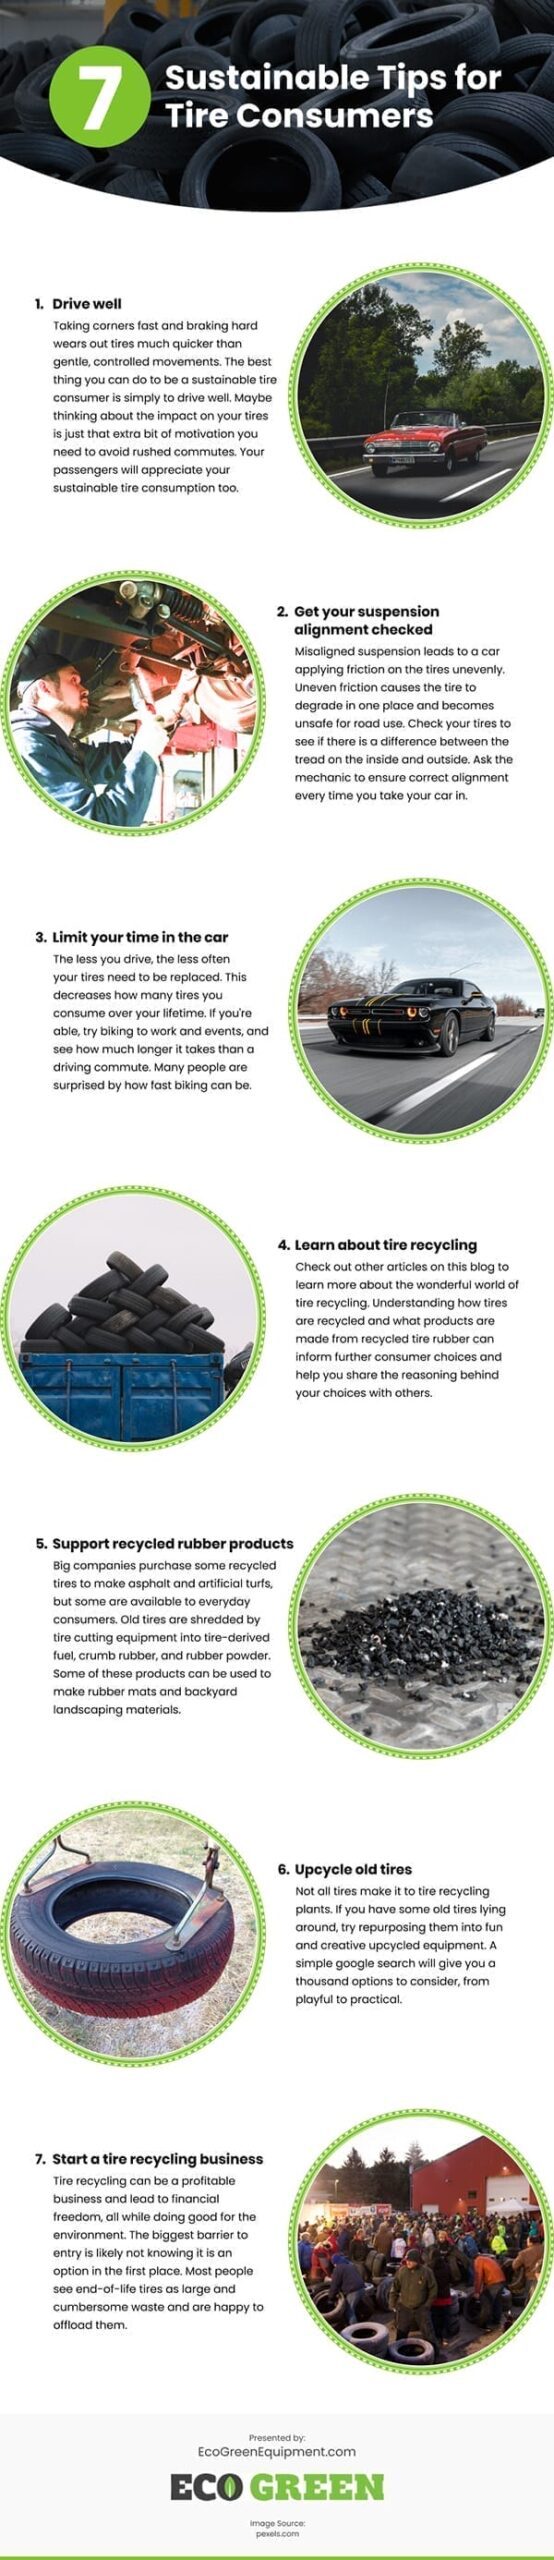 7 Sustainable tips for Tire Consumers Infographic